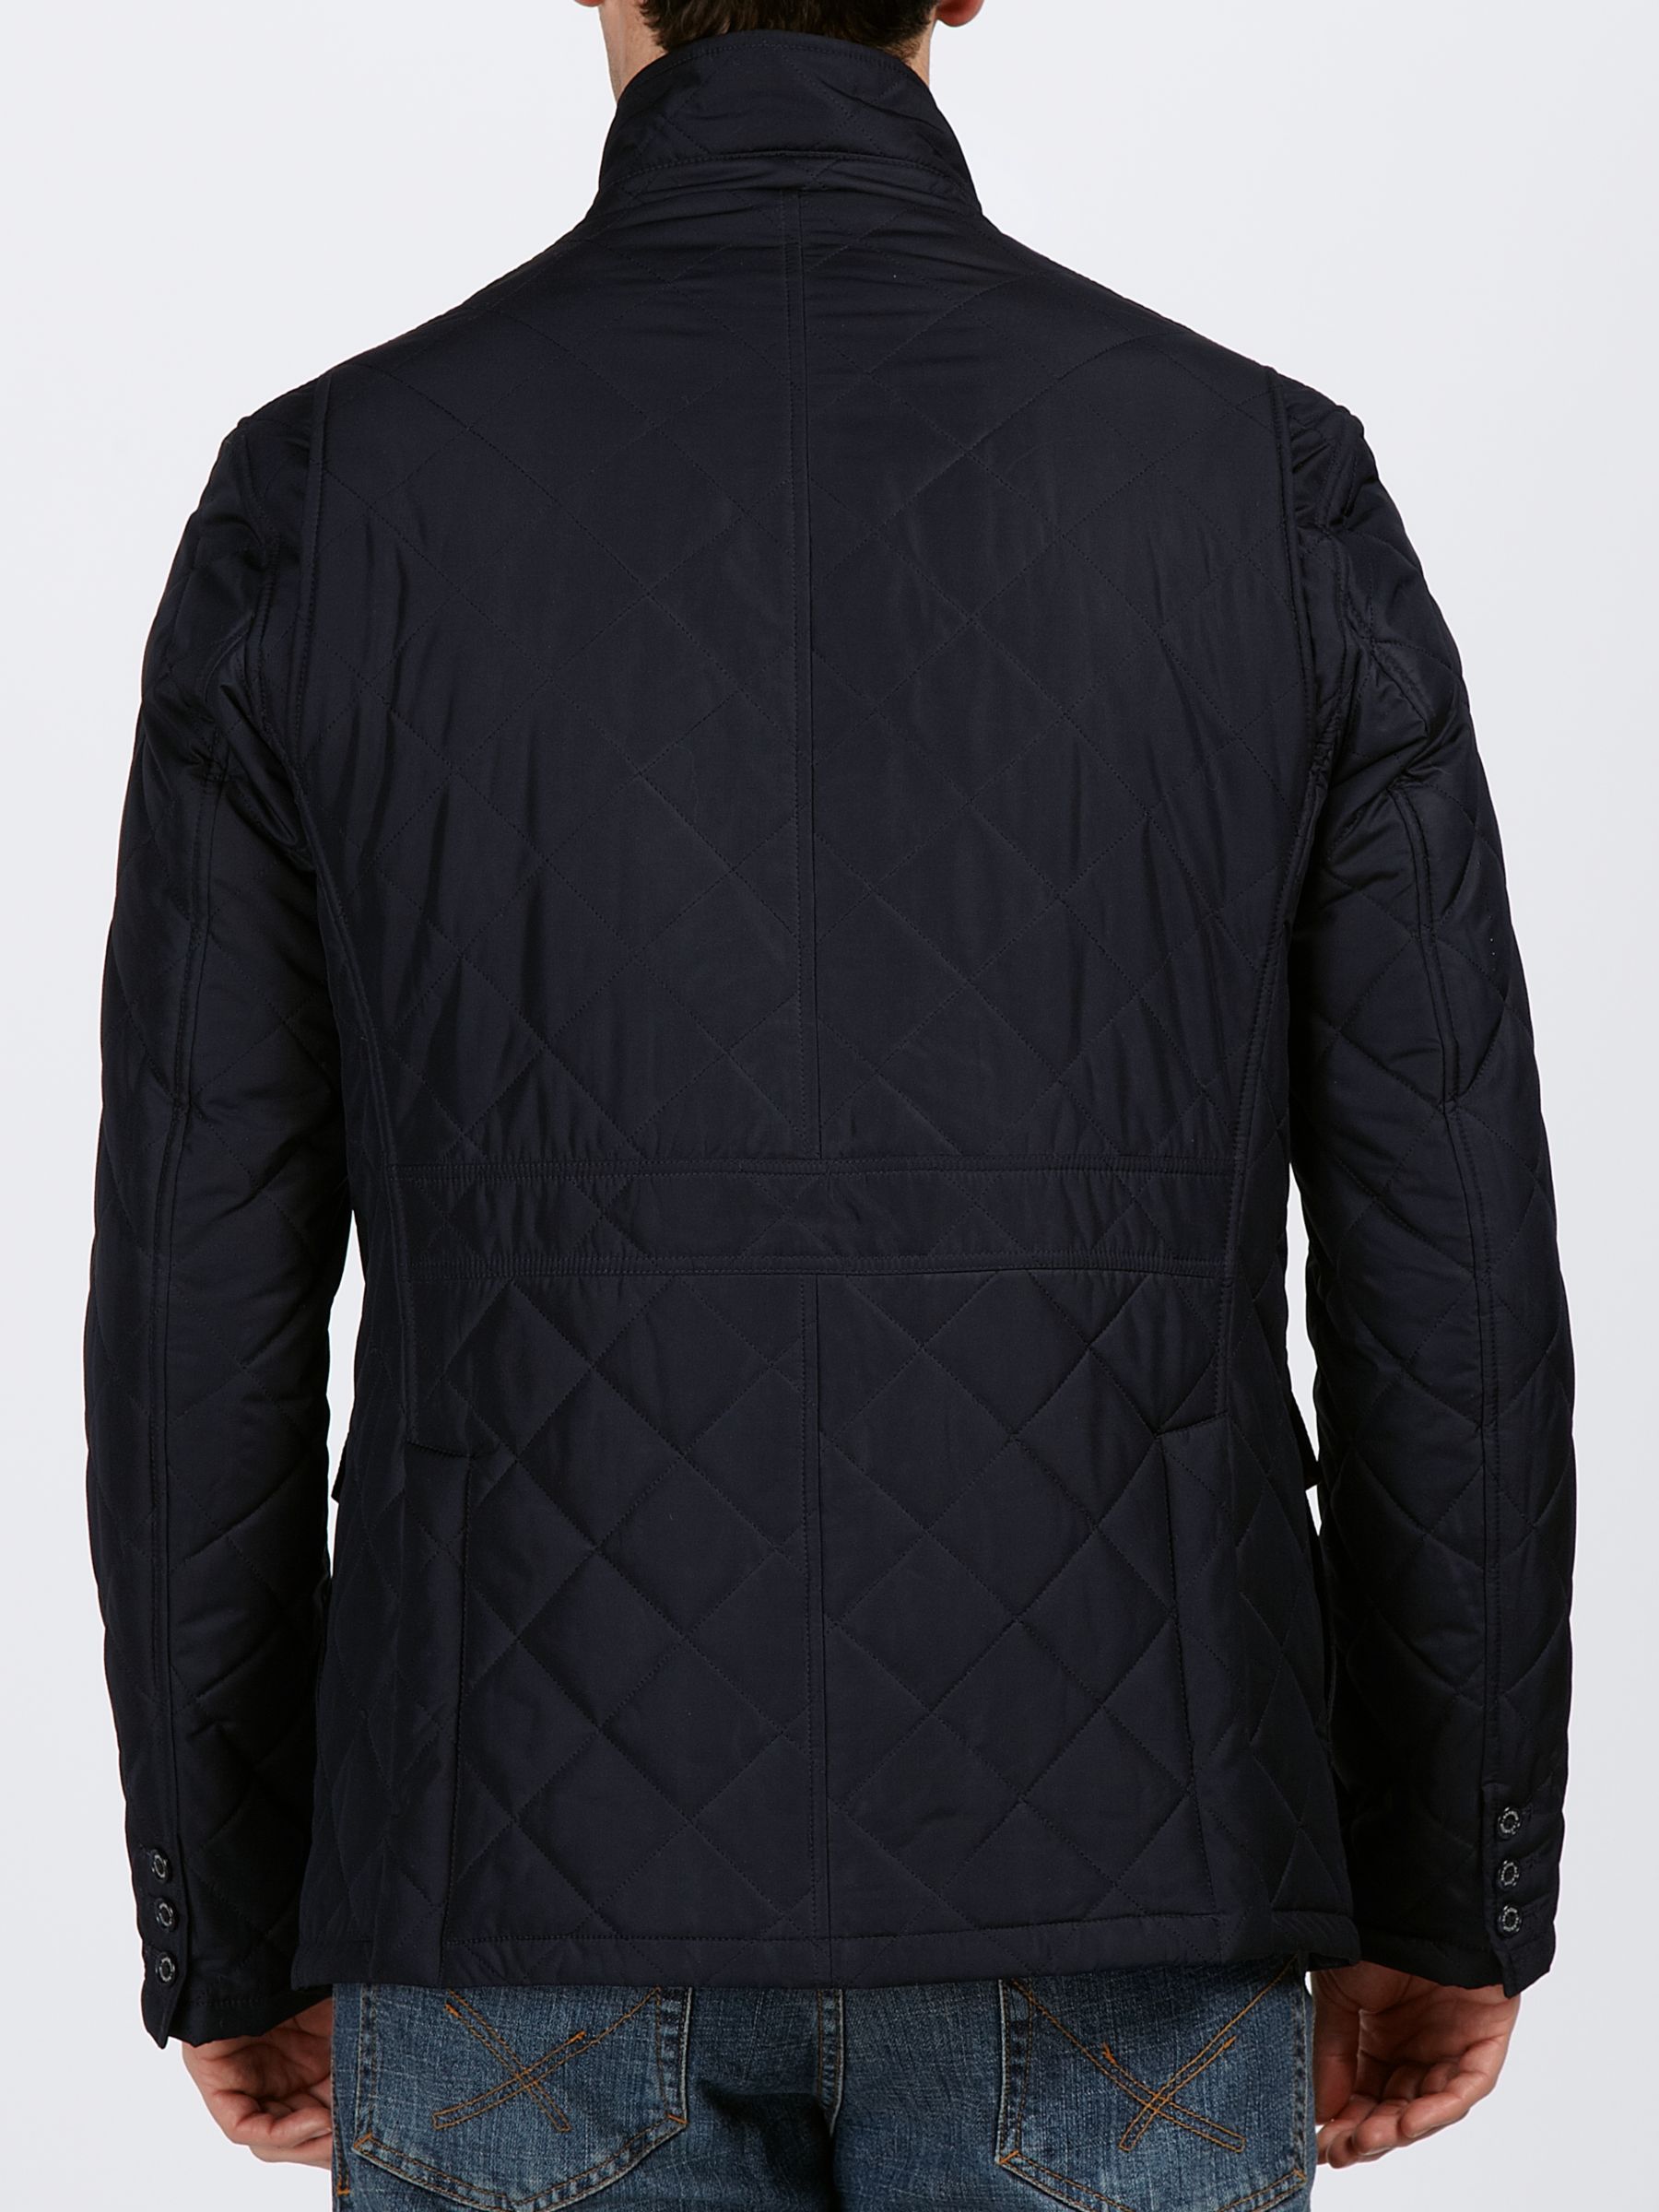 barbour lutz navy quilted jacket